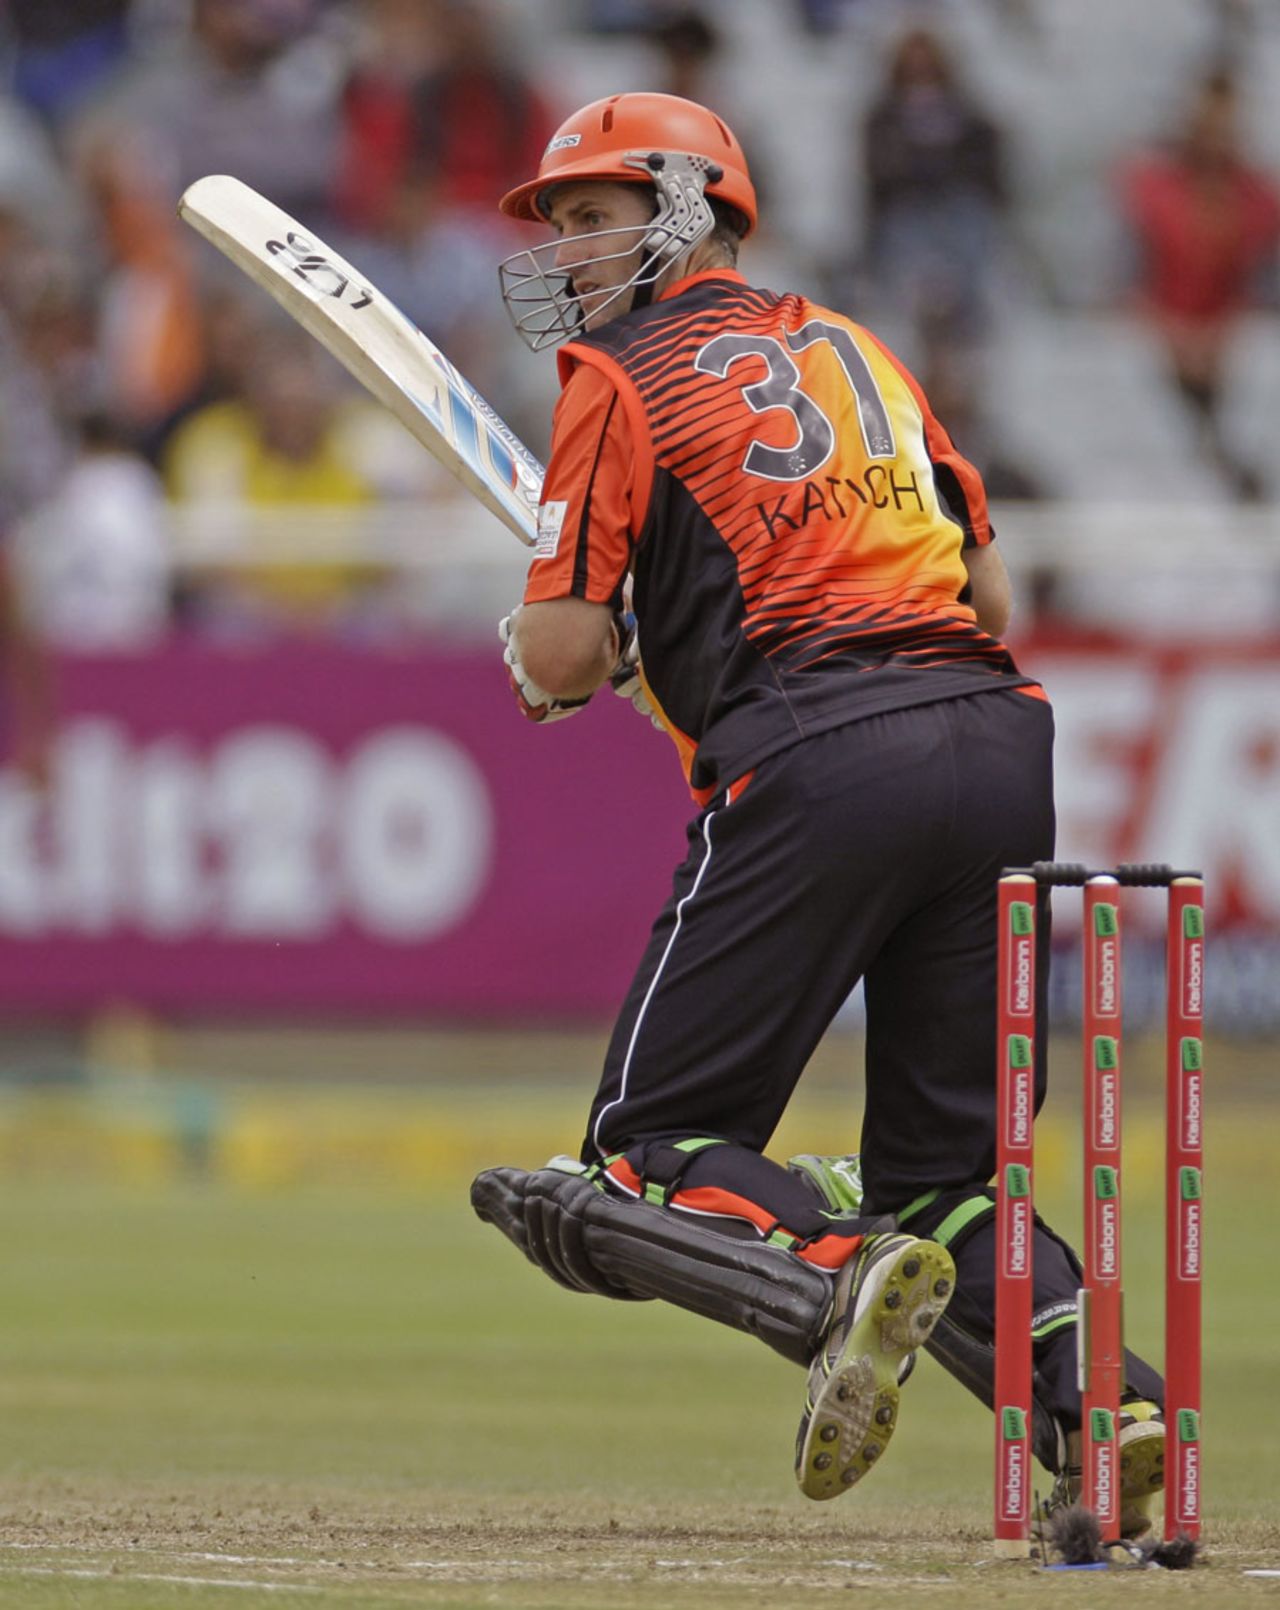 Simon Katich worked his way to 34 off 33, Delhi Daredevils v Perth Scorchers, Champions League T20, Cape Town, October 21, 2012